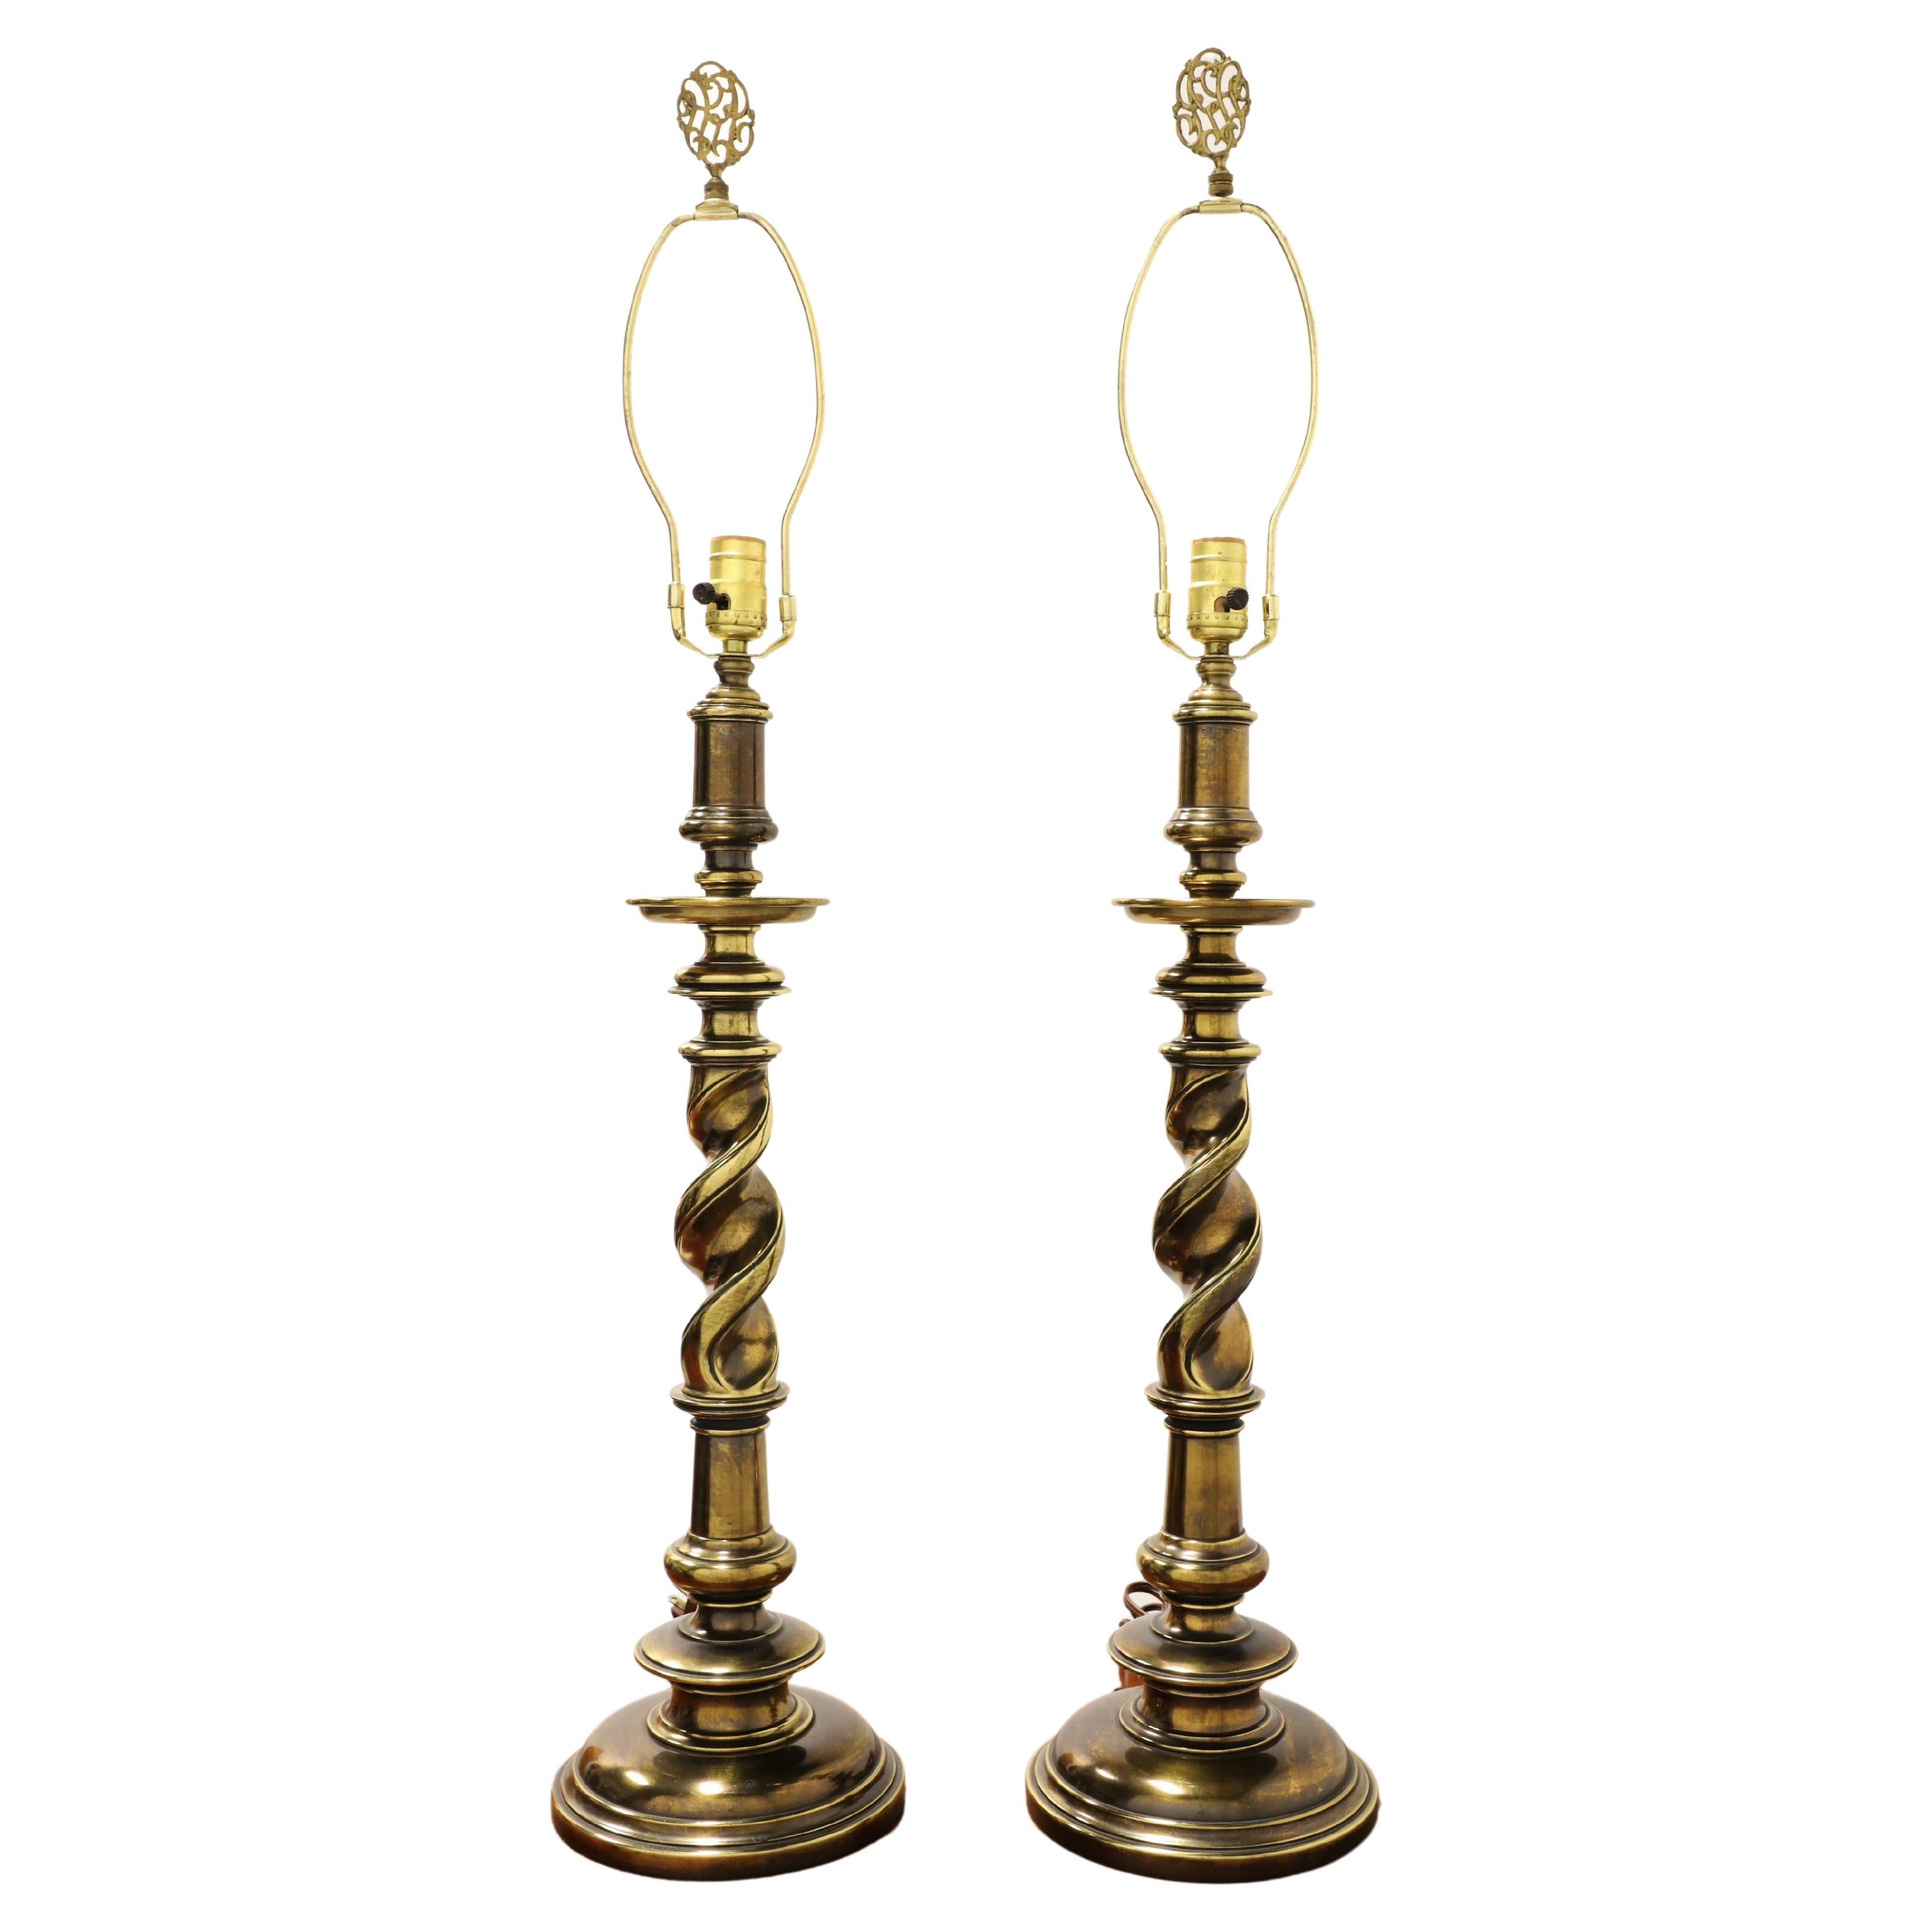 1960's Hollywood Regency Brass Barley Twist Table Lamps - Pair For Sale